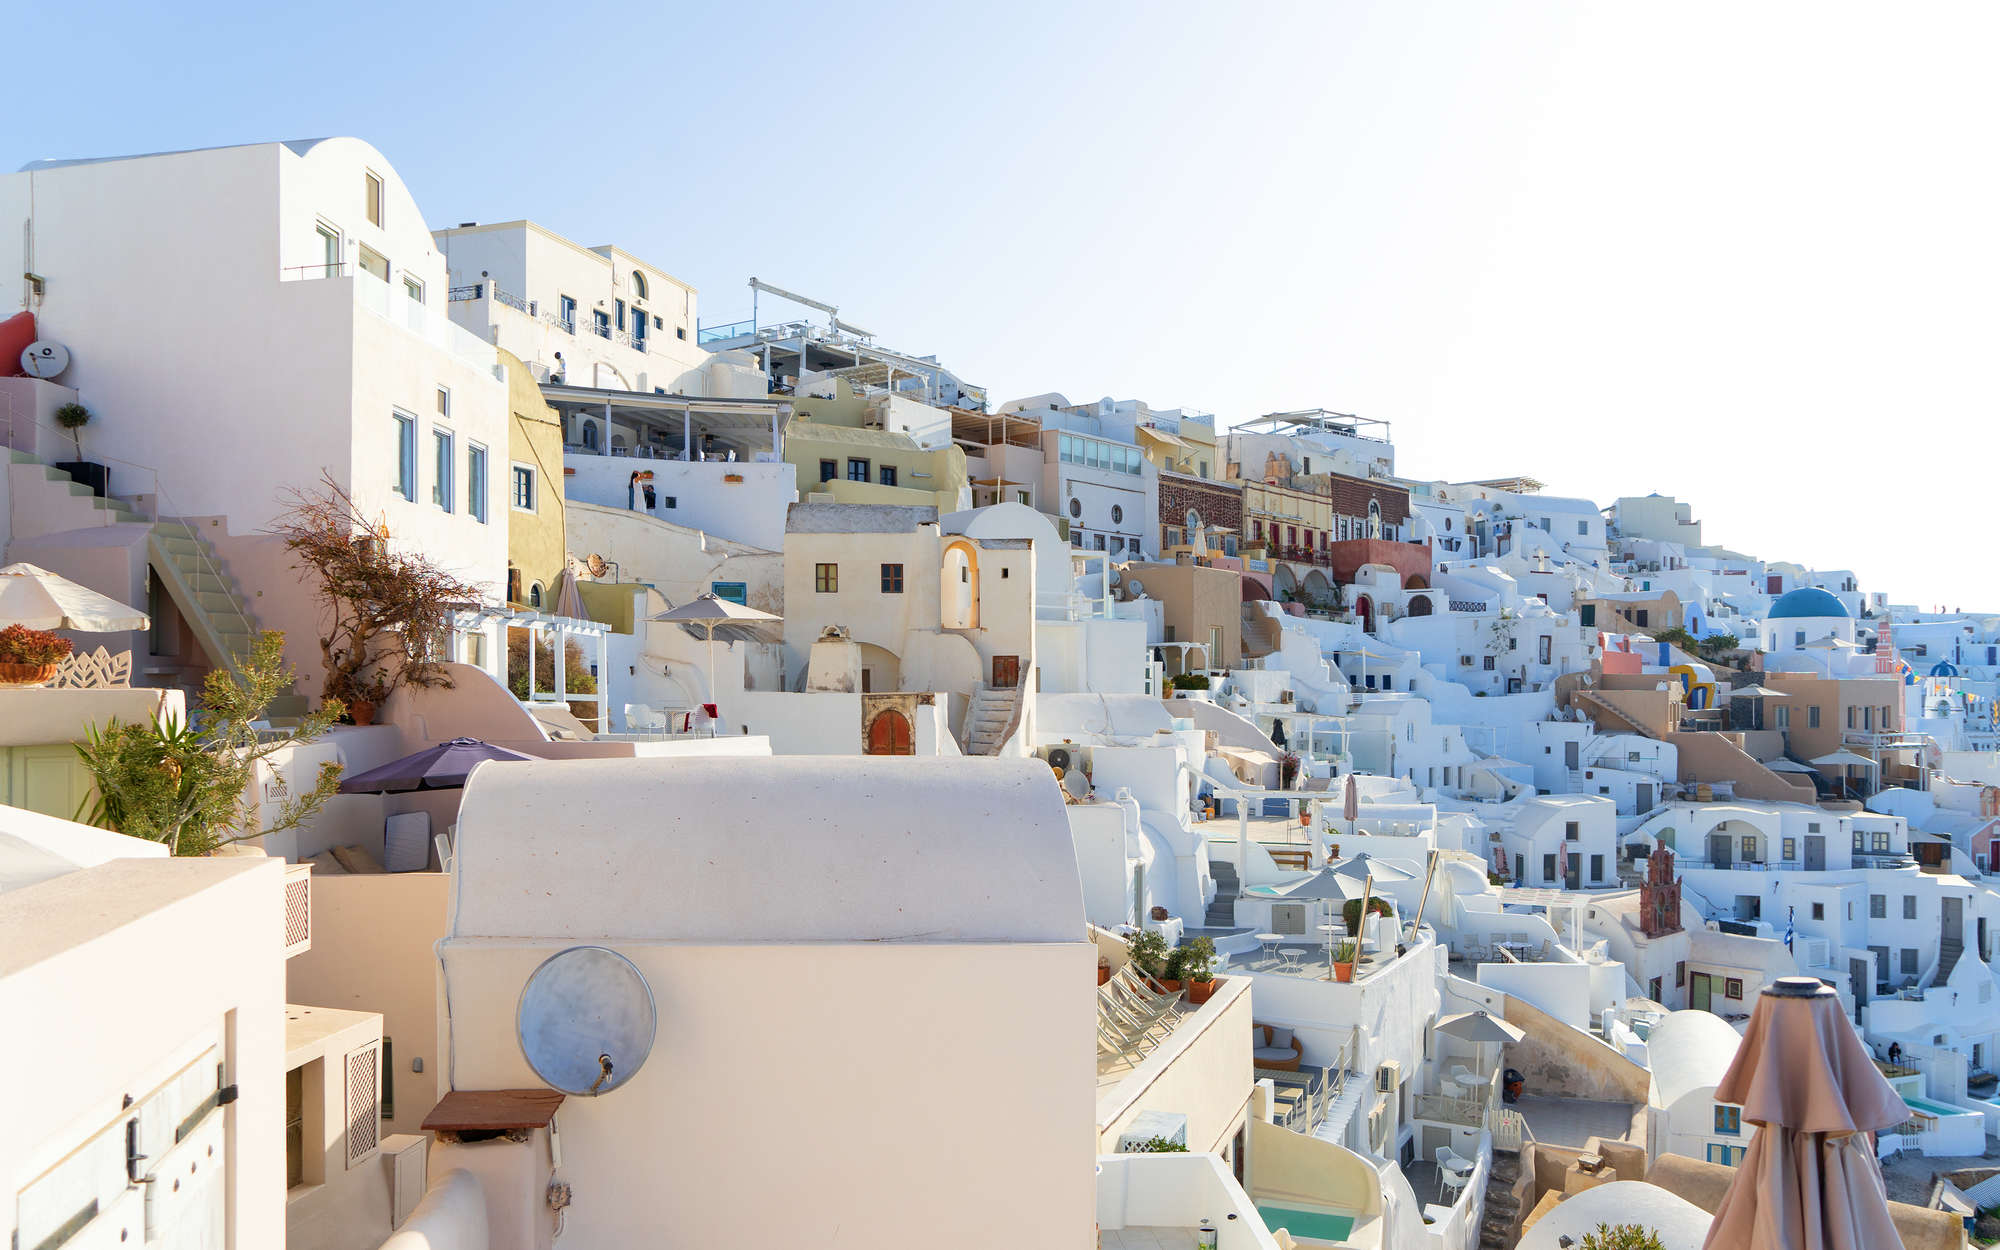             Photo wallpaper Santorini in the midday sun - mother-of-pearl smooth fleece
        